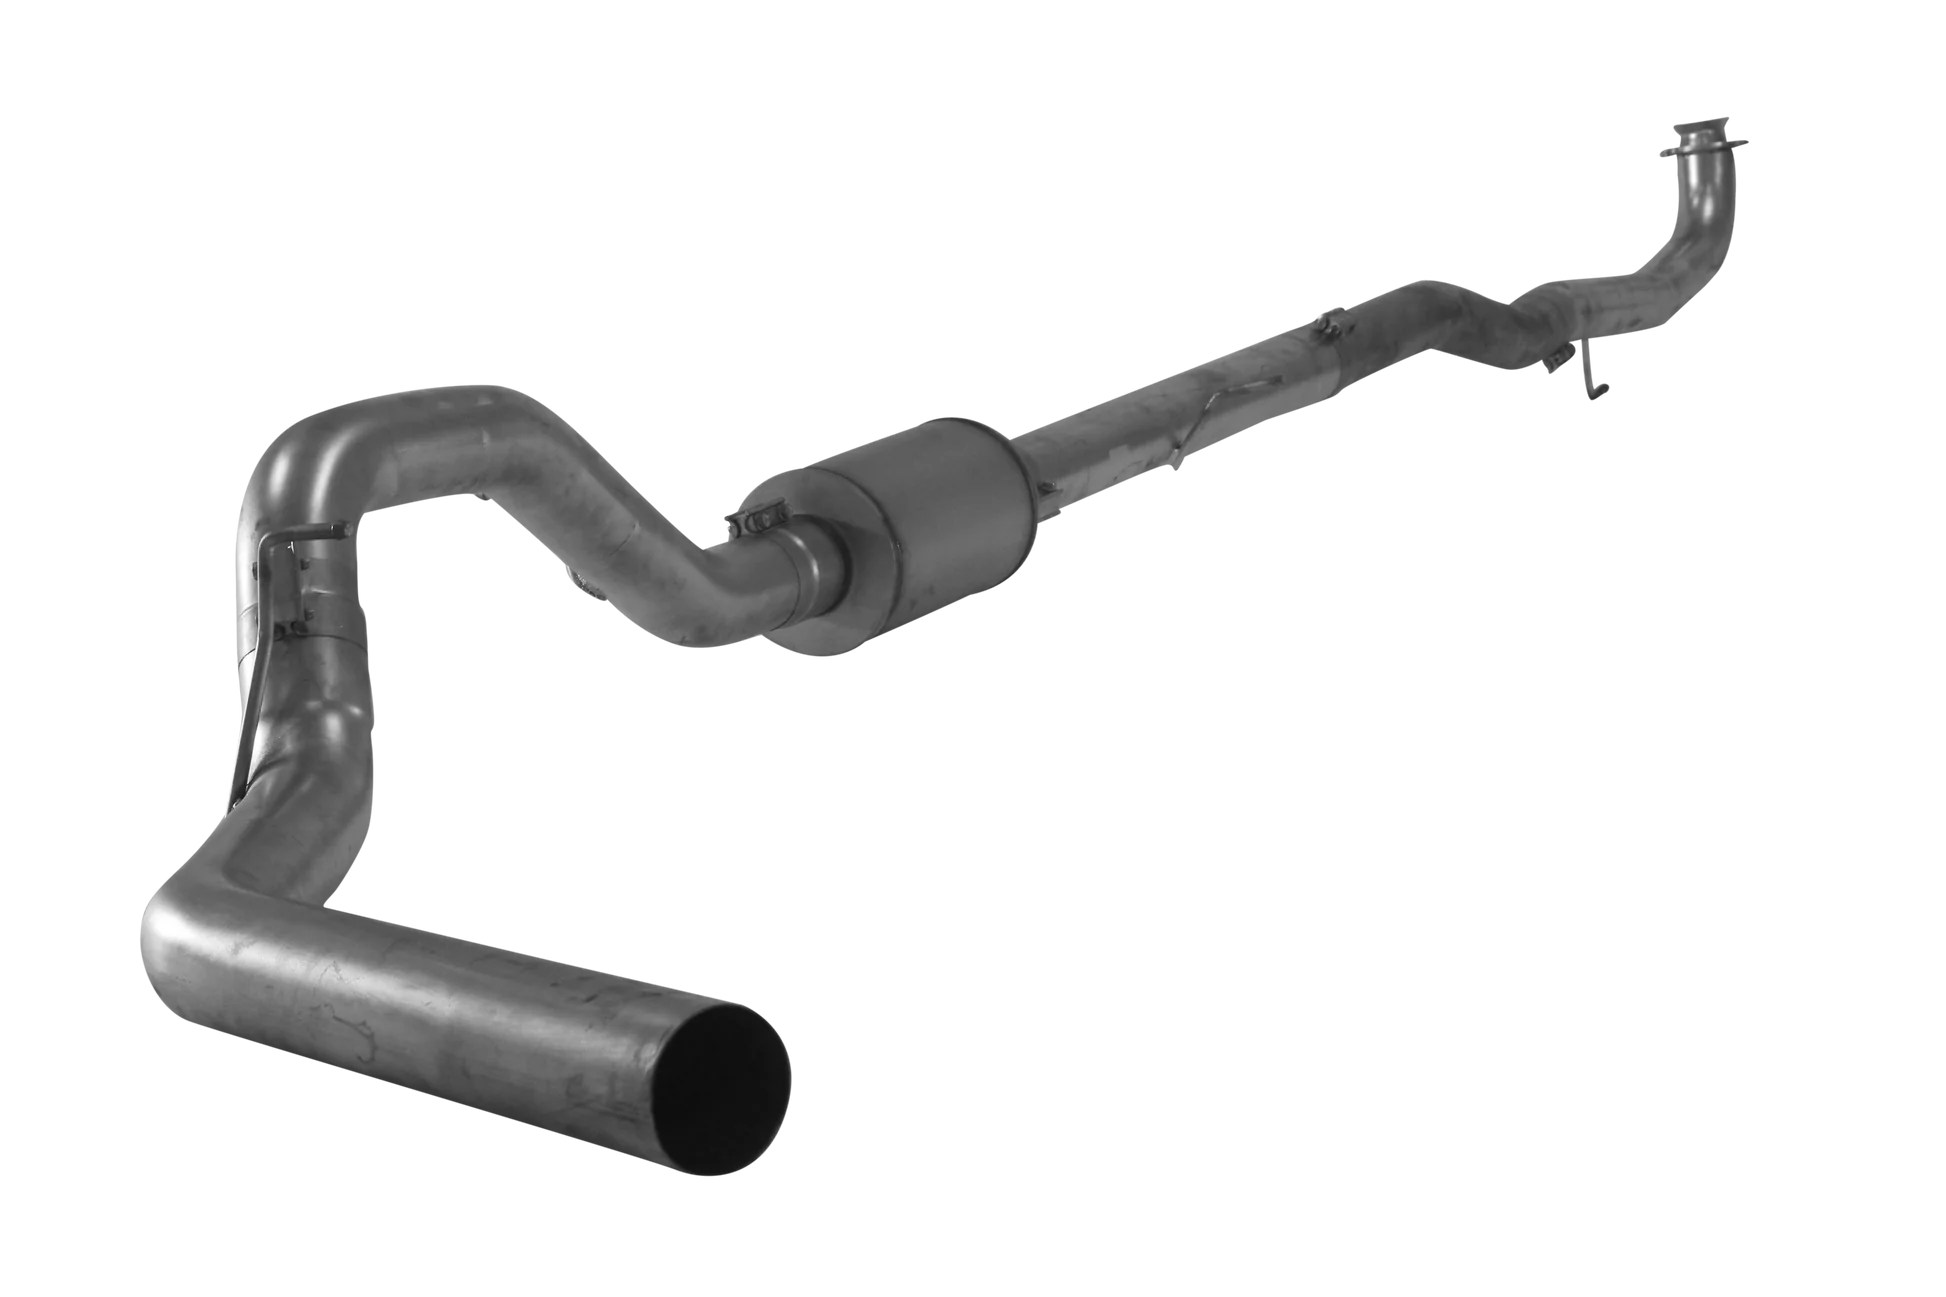 431024 431025 Mel's Manufacturing 4" Downpipe Back Single | Cab & Chassis-2017-2019 GM 2500/3500 6.6L DURAMAX L5P   Mels Mfg FloPro Flo-Pro Flo Pro Hell On Wheels Performance Ltd Limited Canadian Owned and Operated Online Diesel Parts Distribution & Wholesale Supply Center in Alberta Canada Shipping Supplying to Alberta British Columbia Sask Saskatchewan Manitoba Ontario Quebec Newfoundland Labrador New Brunswick Nova Scotia Prince Edward Island AB BC SK MB ON QC PQ NS NB NFLD N.L. PEI